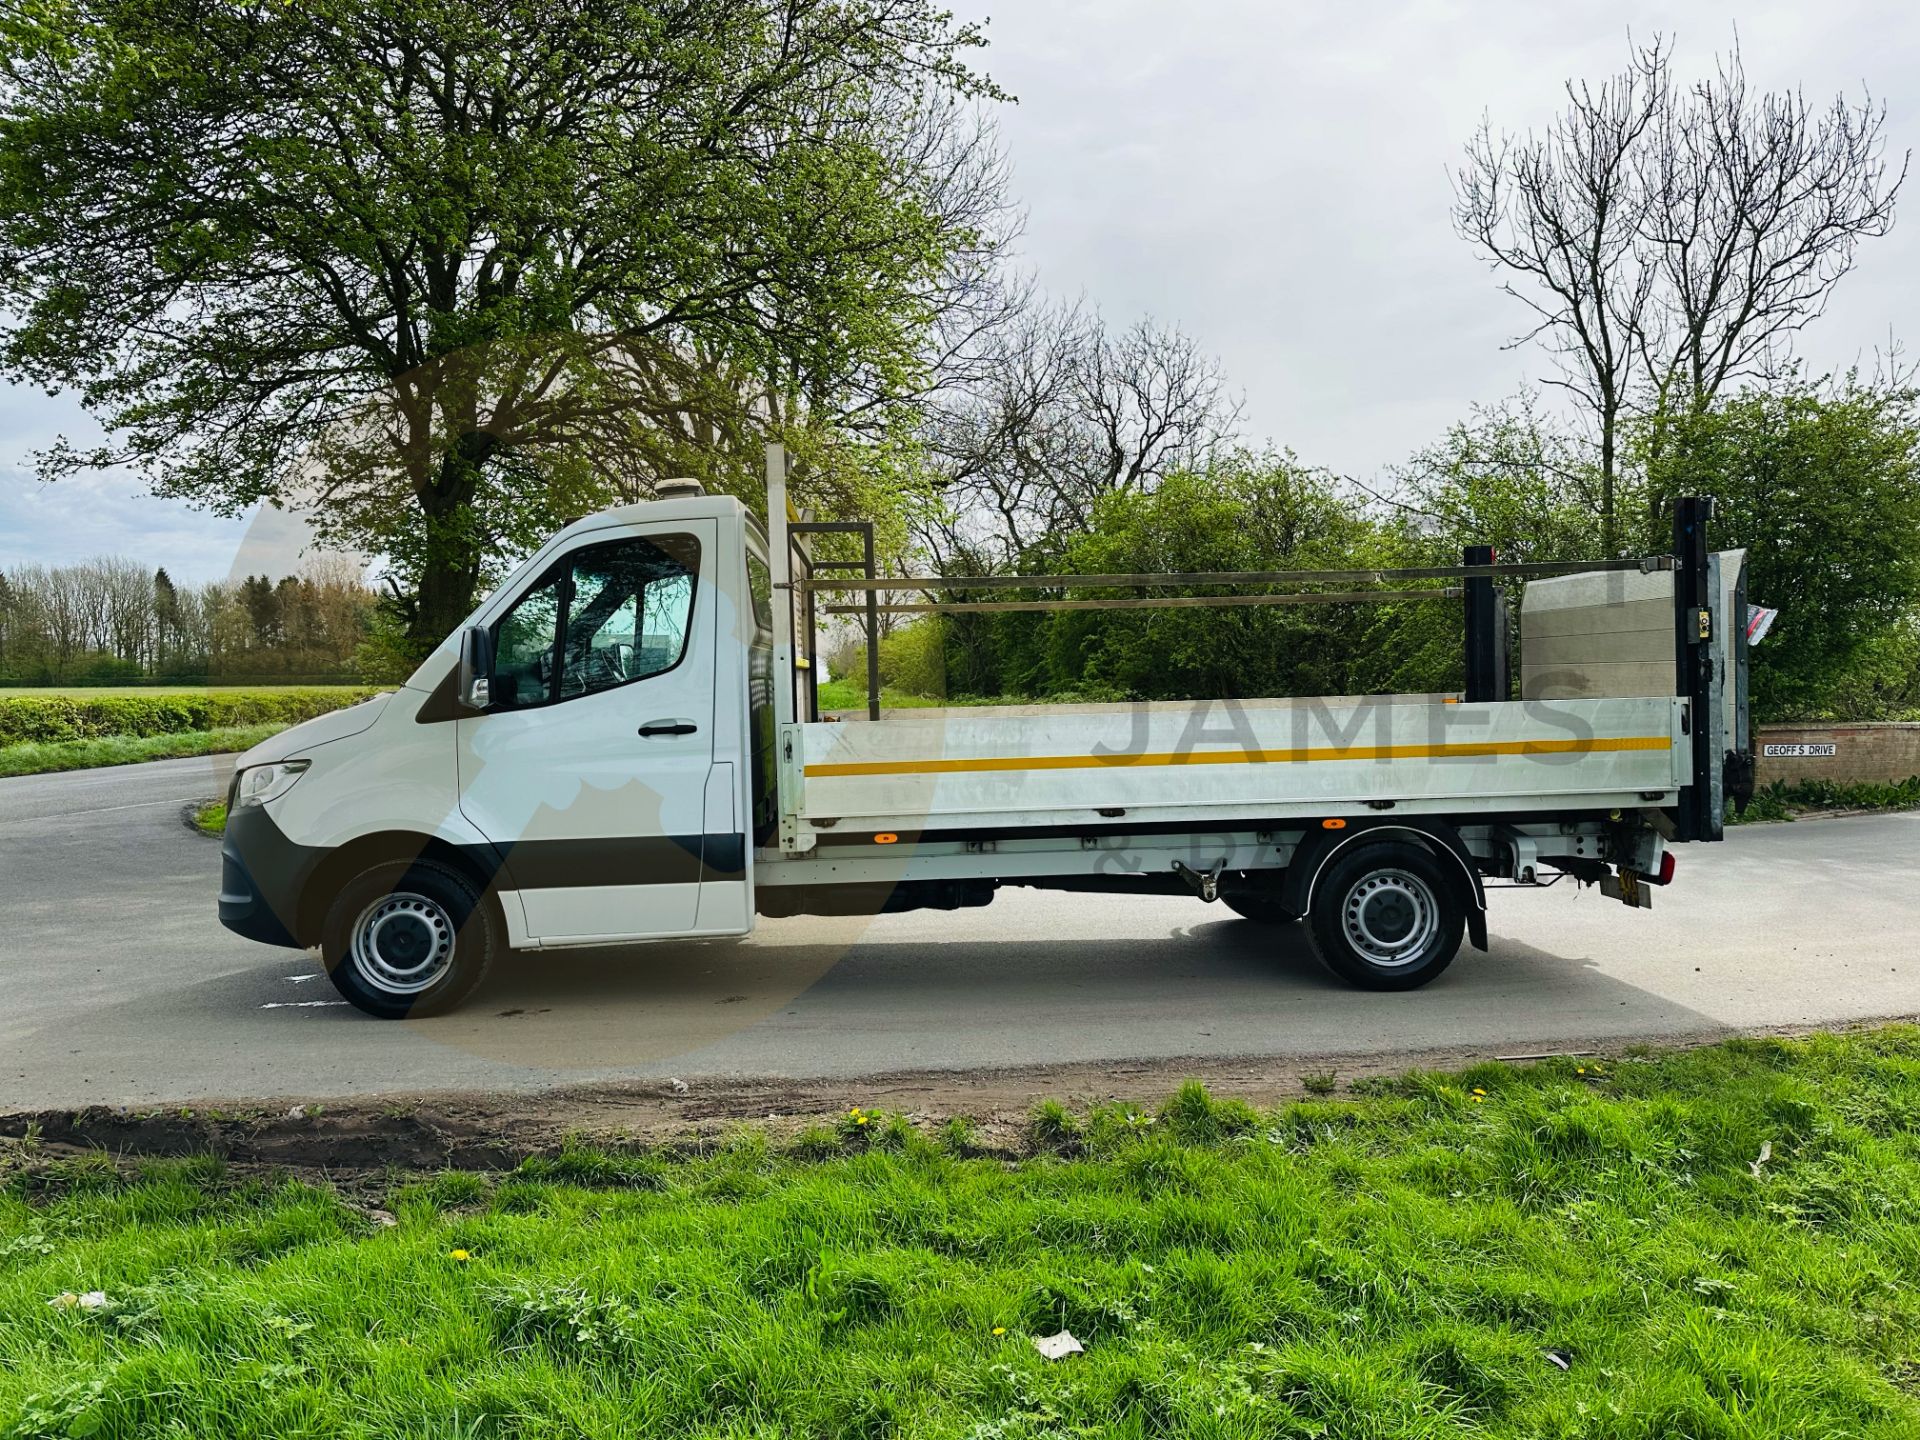 MERCEDES SPRINTER 316CDI LONG WHEEL BASE DROPSIDE WITH ELECTRIC TAIL LIFT -2020 MODEL- 1 OWNER - FSH - Image 6 of 30